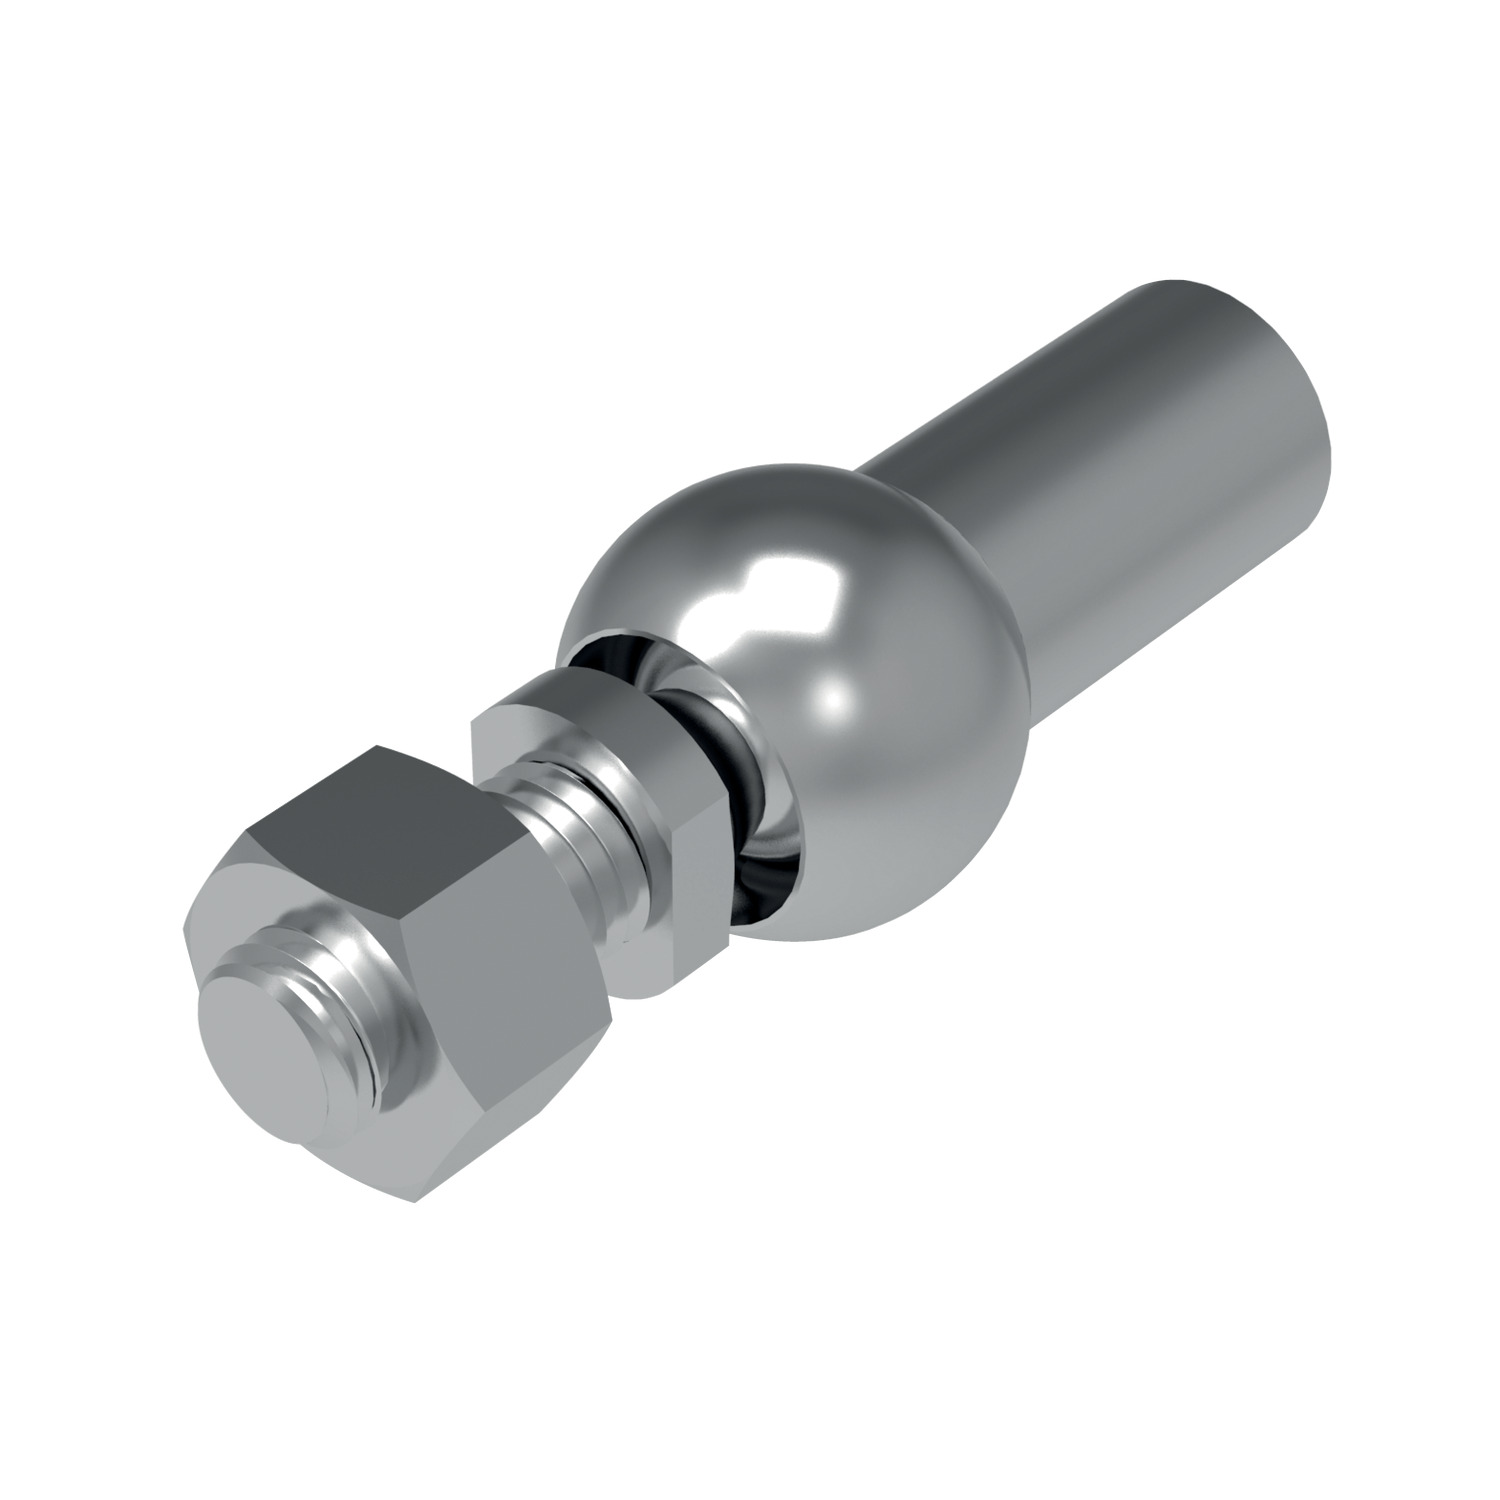 65526.W0005 Stainless Axial Ball and Socket Joints. Left - 8 - M 5 - 22